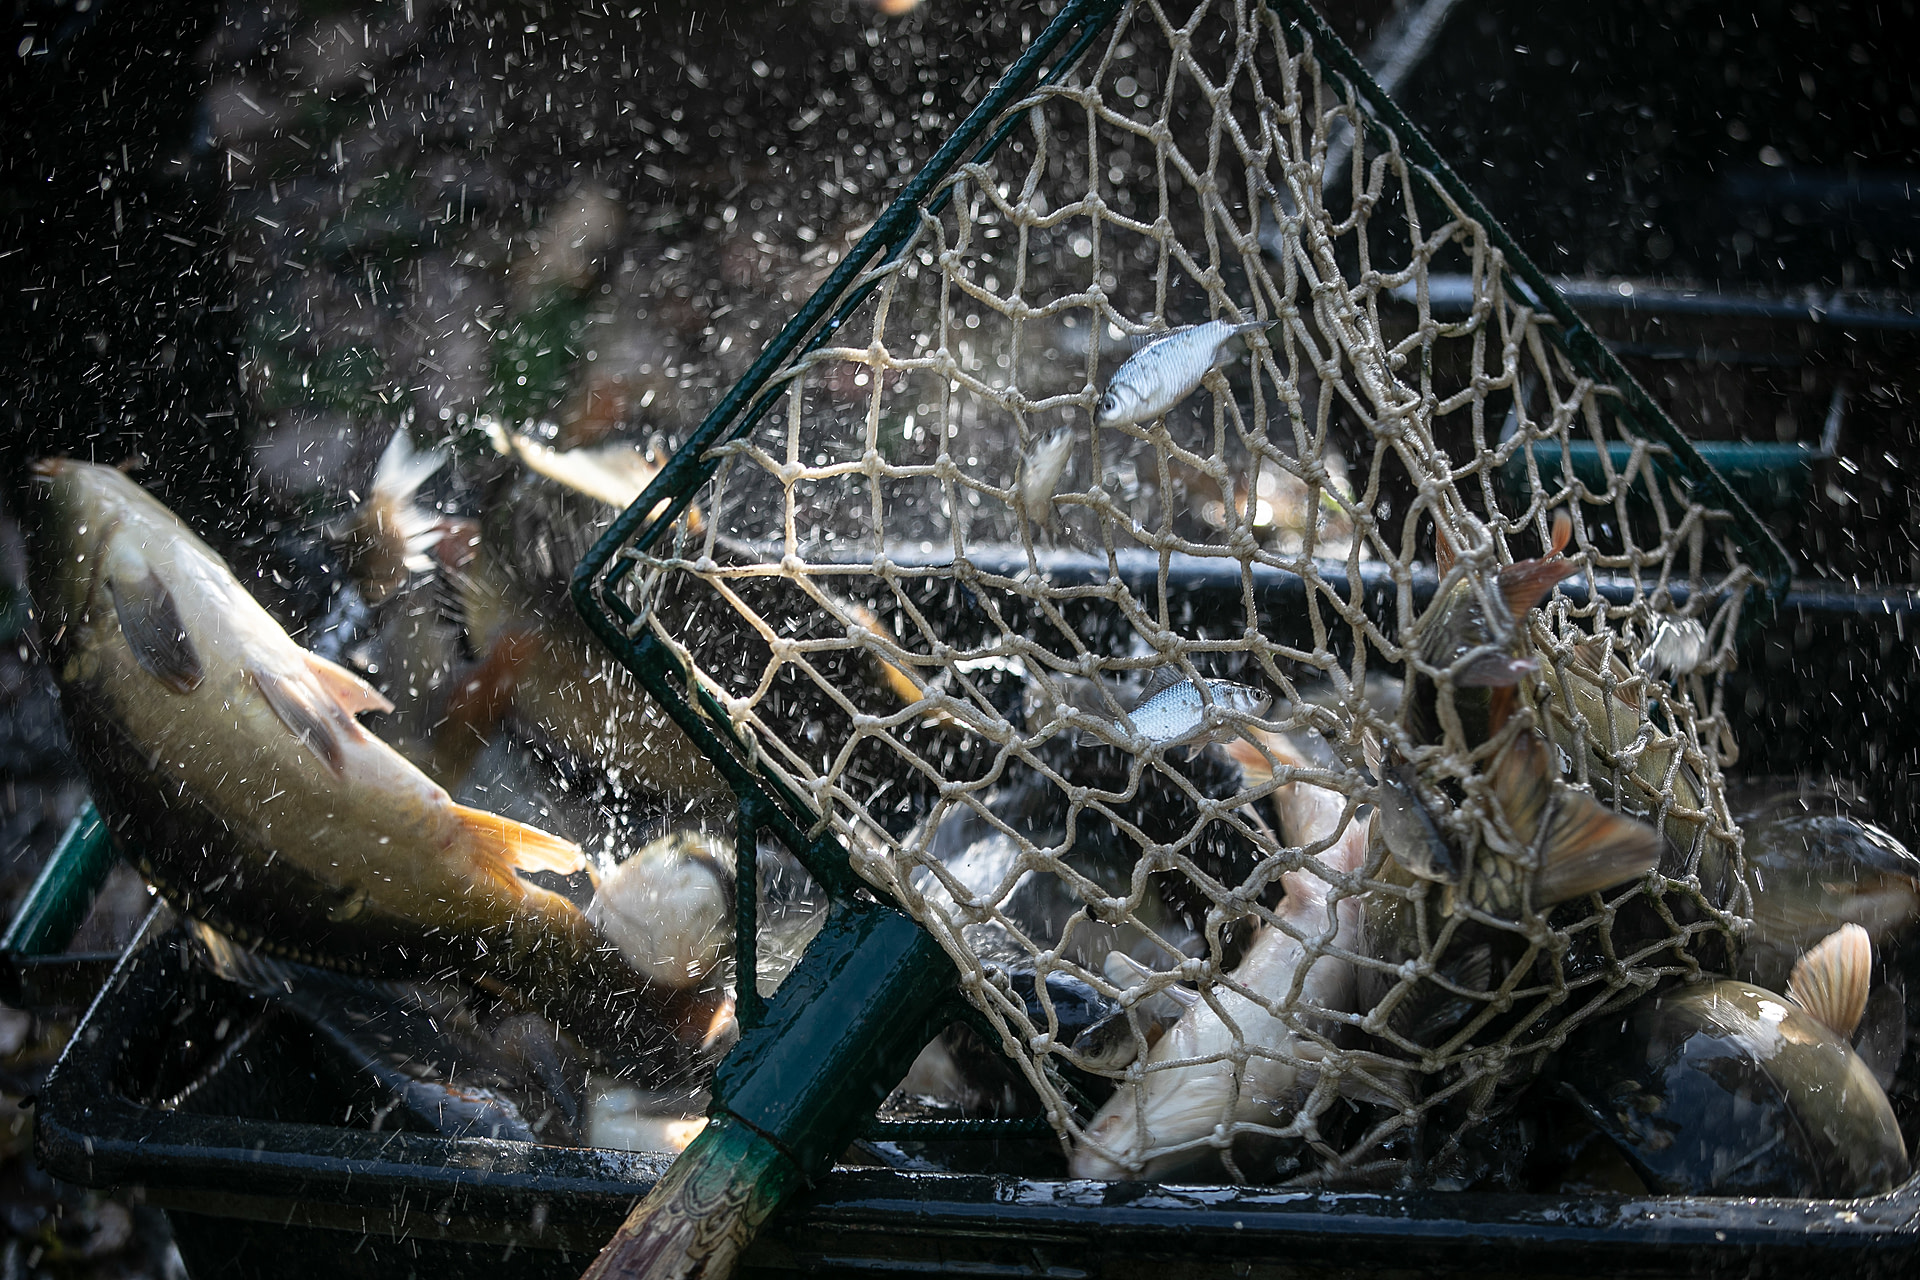 Carp are scooped up with a landing net so they can be moved to the sorting area where they will be segregated. Once sorted, they are moved to a storage pond to be sold.